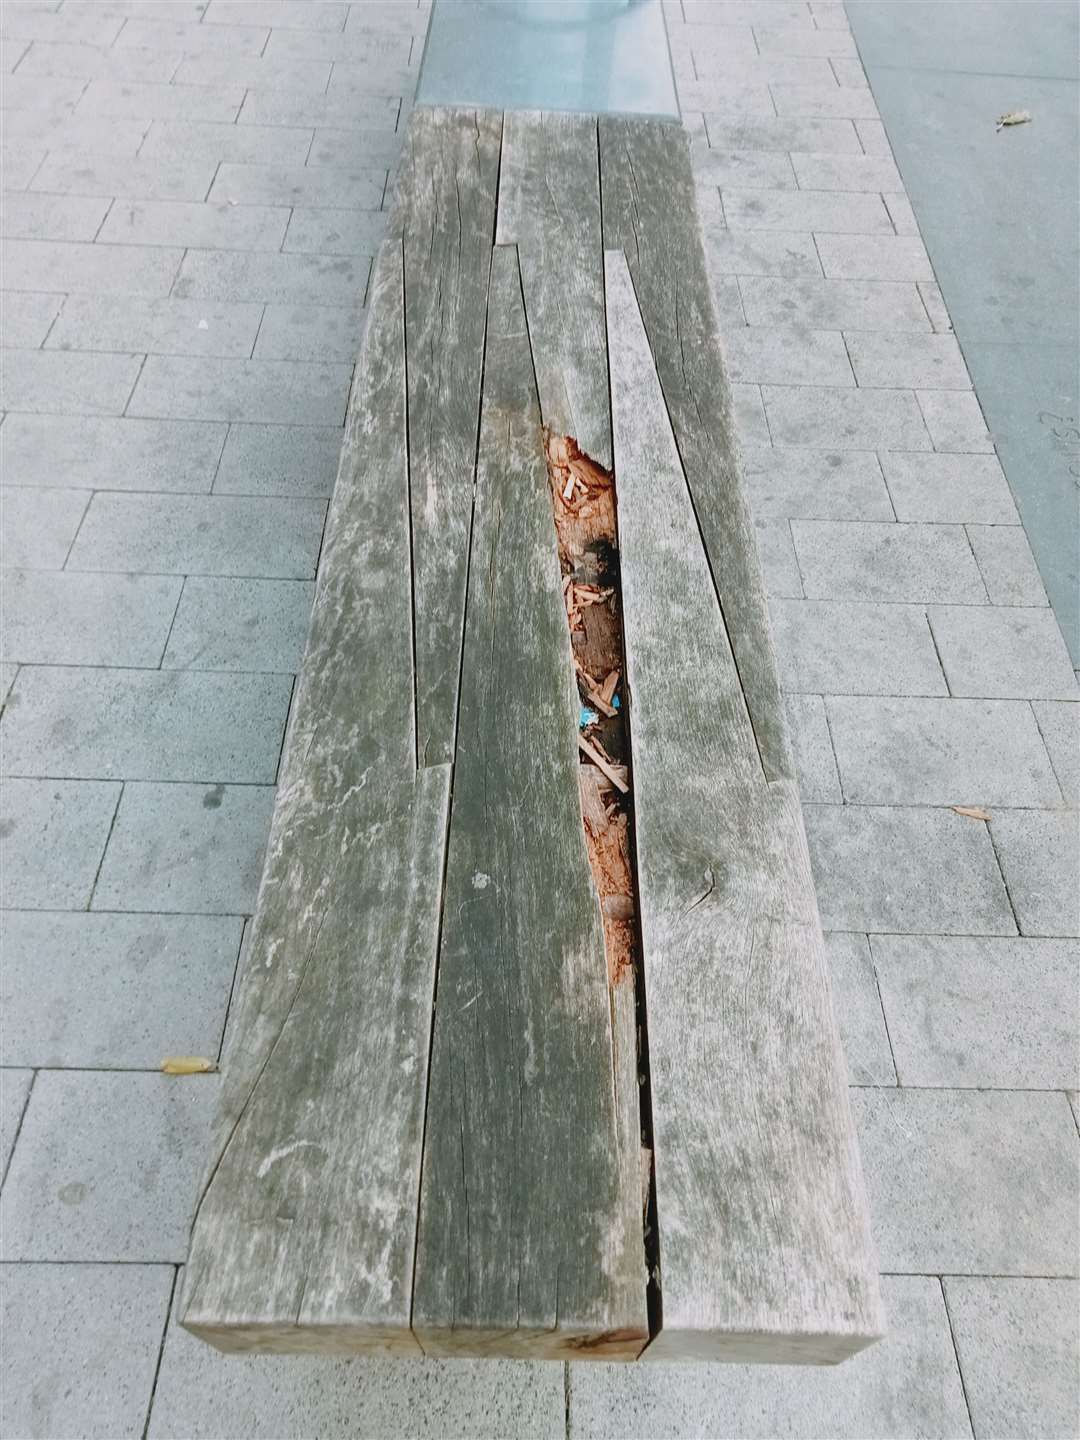 A bench outside Natwest in Chatham which is damaged